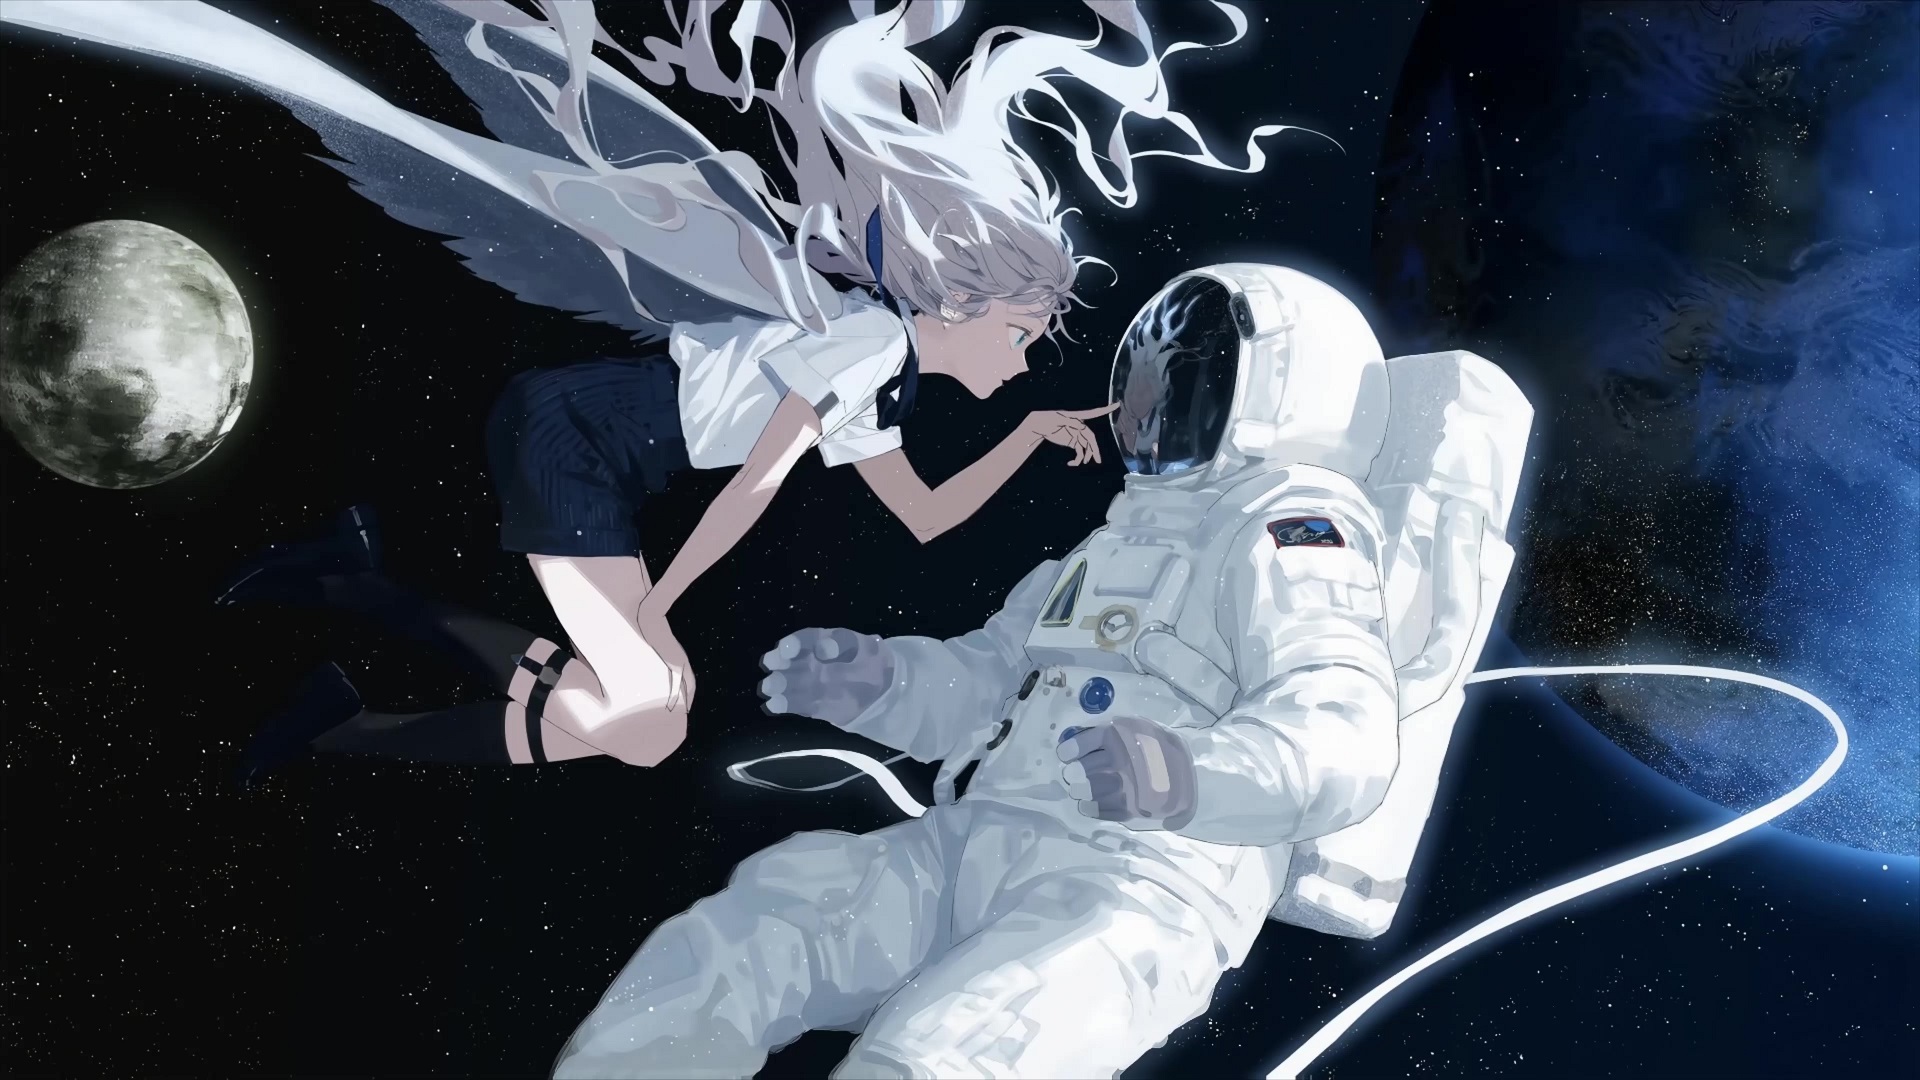 Anime Space Girl 🚀 | Science fiction artwork, Space drawings, Anime